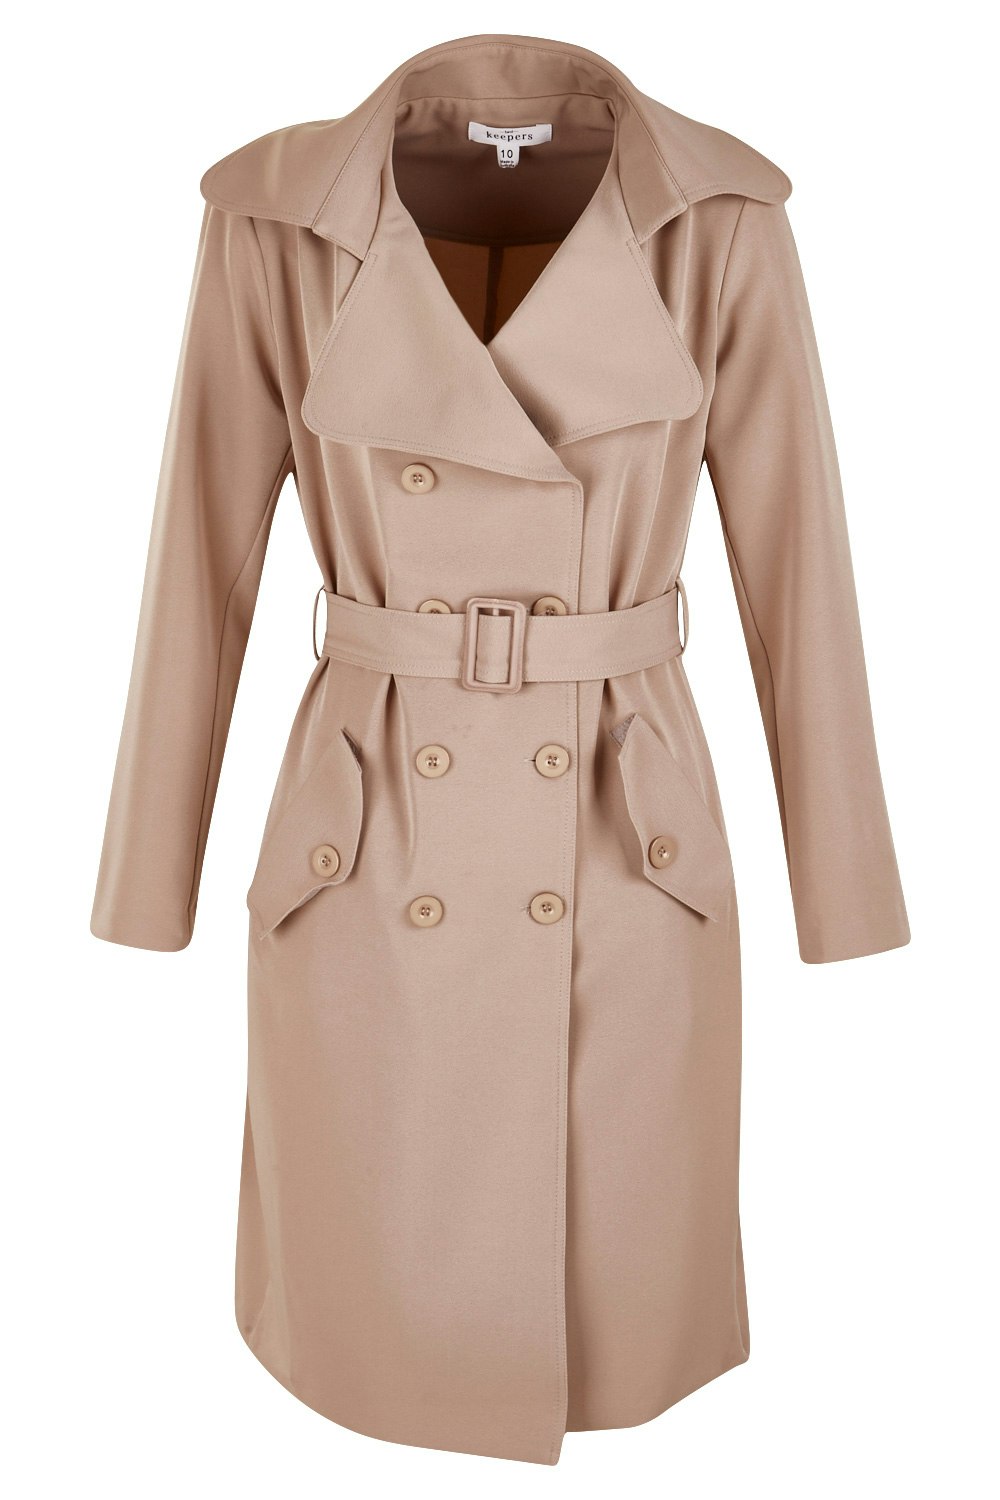 bird by design The Classic Trench - Womens Trench Coats at Birdsnest ...